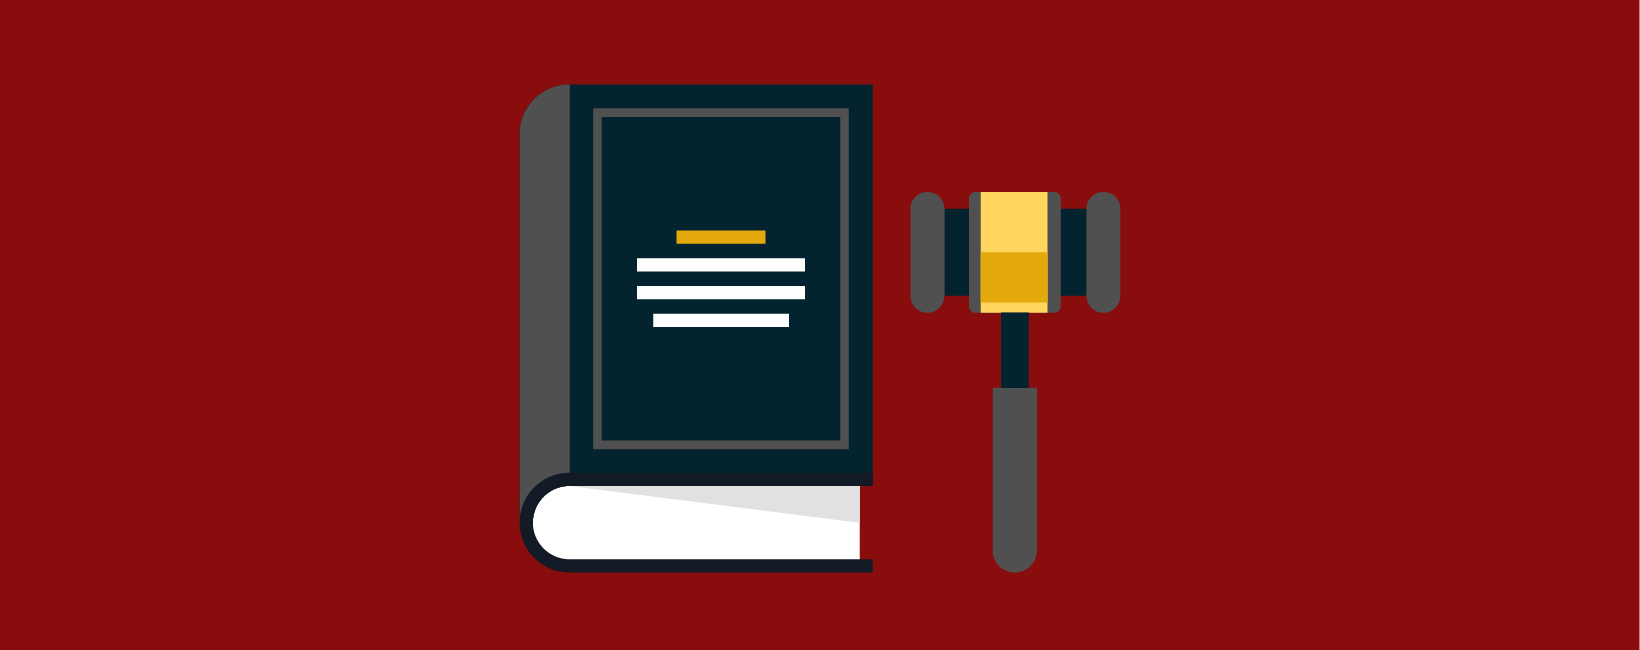 Illustration of a book and a gavel against a red background